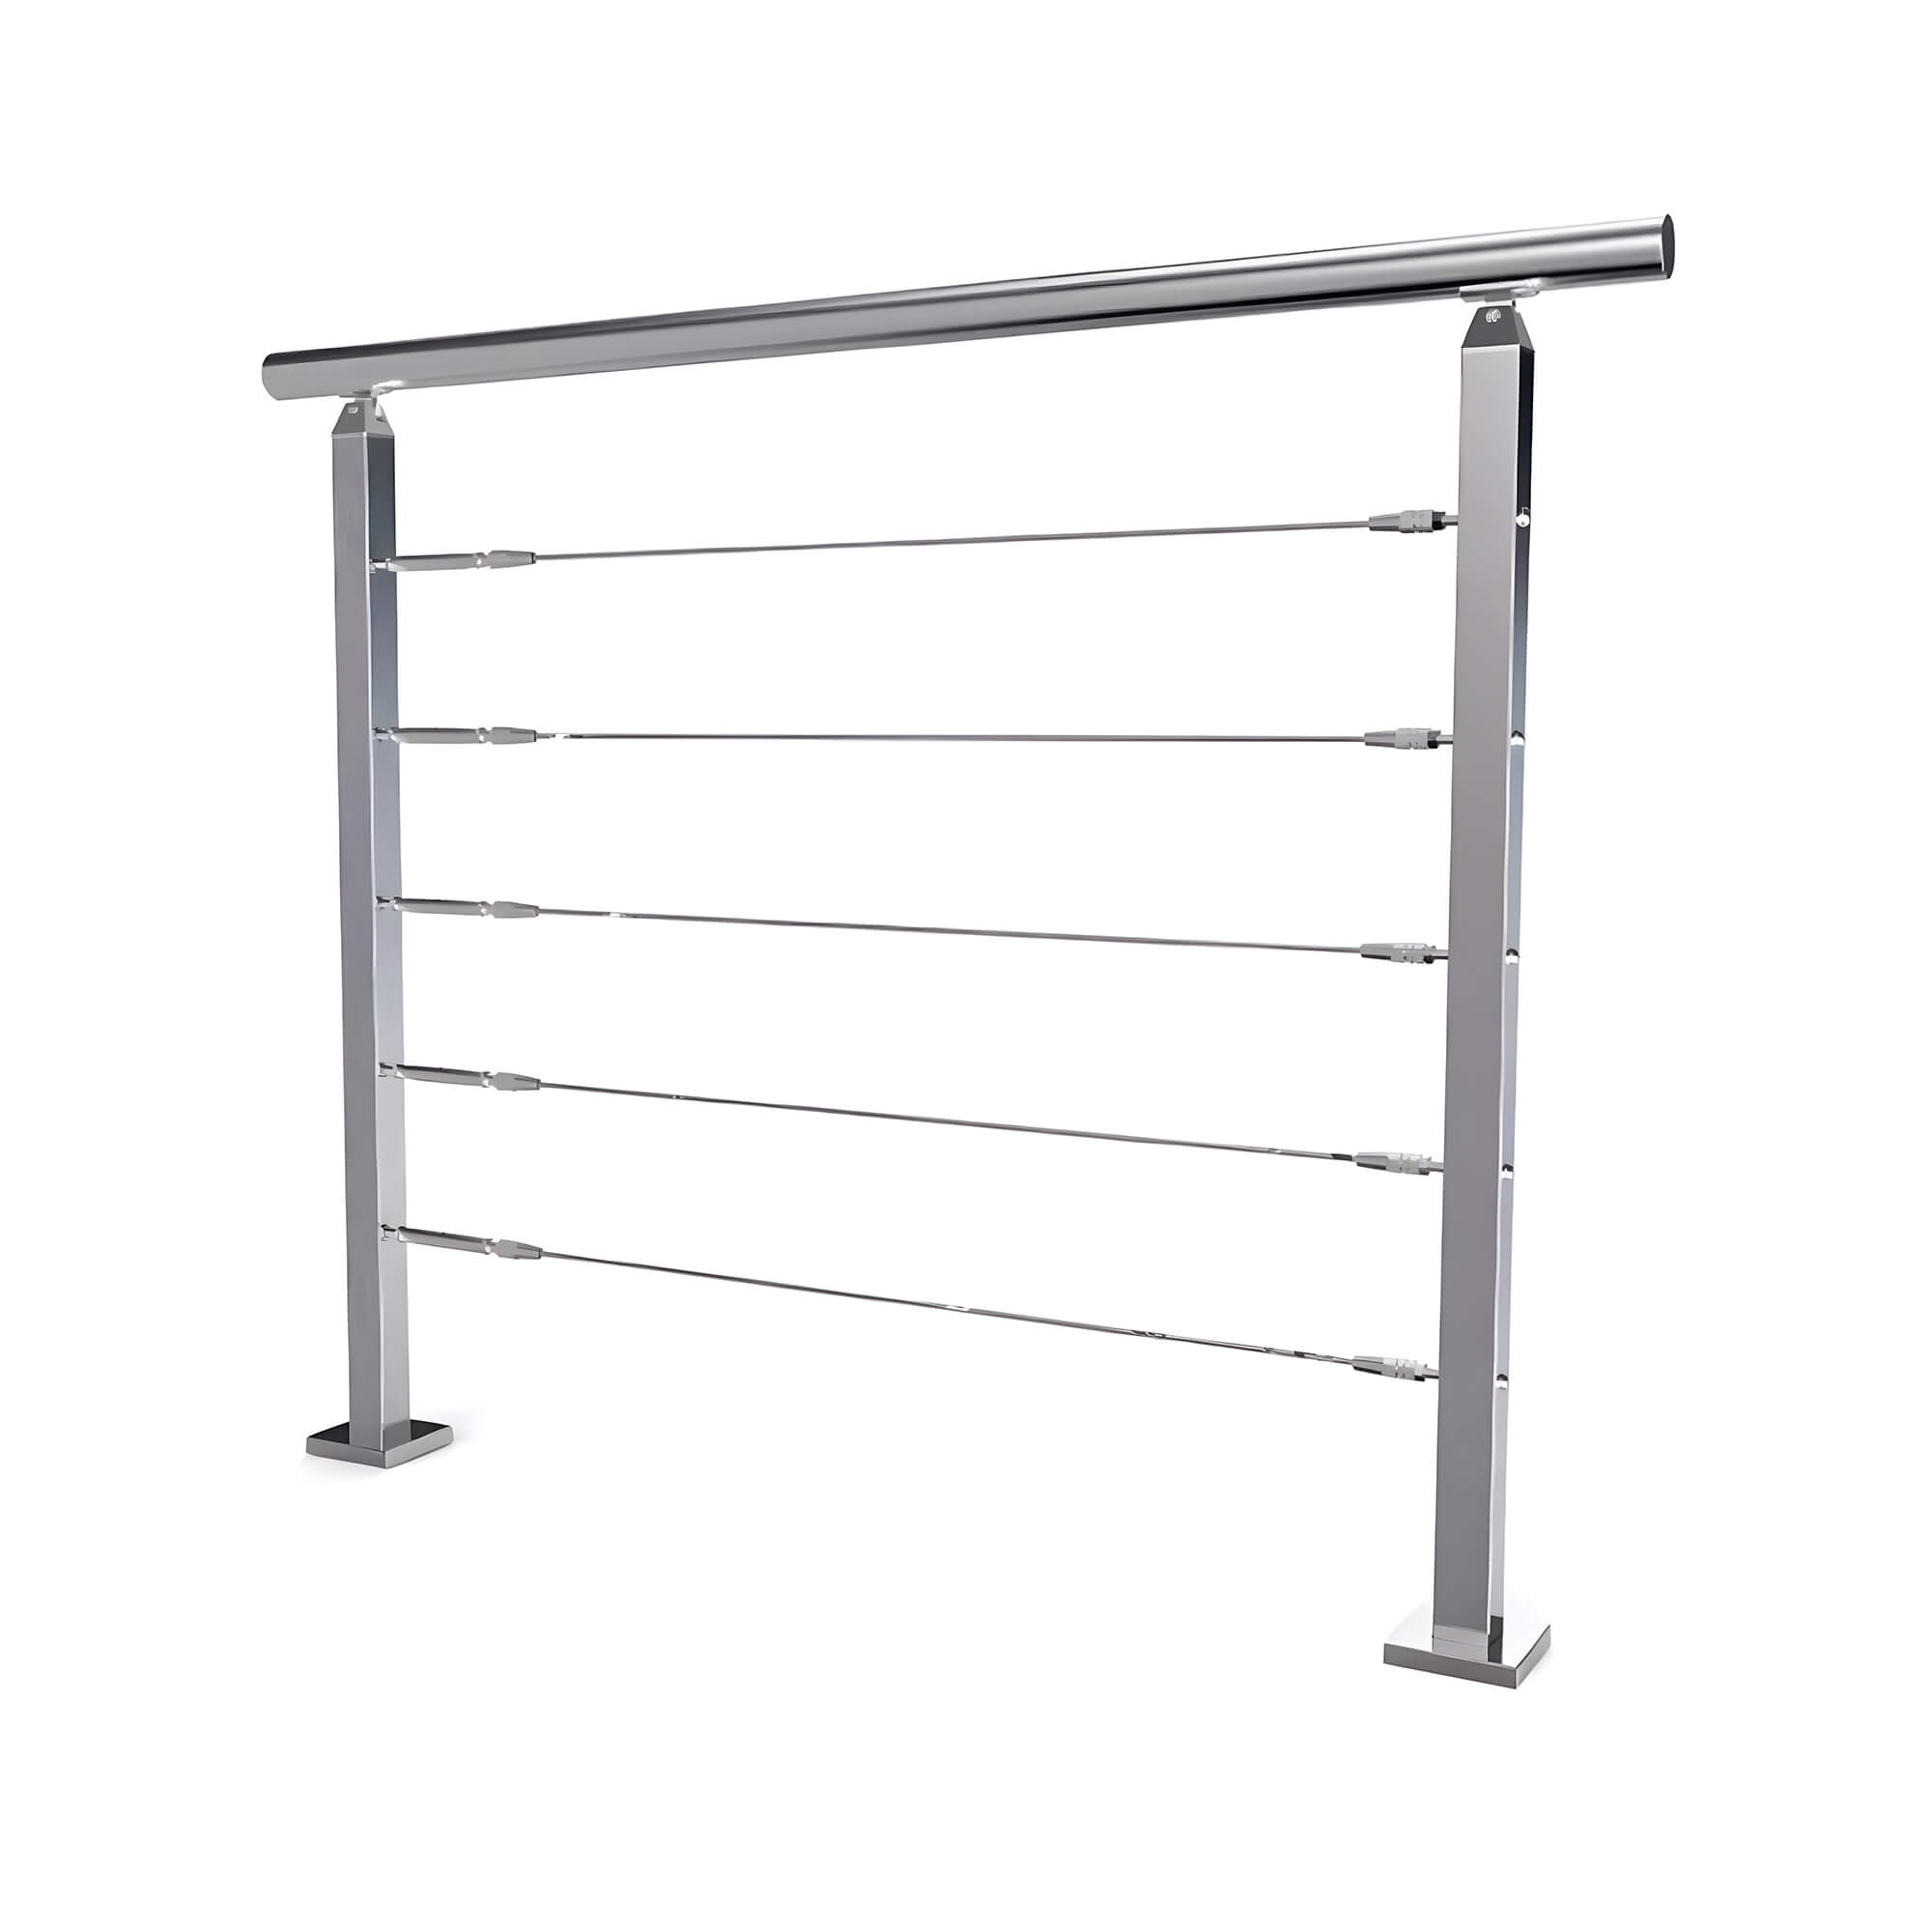 High Quality Stainless Steel Cable Railing Post For Deck Balcony Stair Balustrade Railing Interior And Exterior